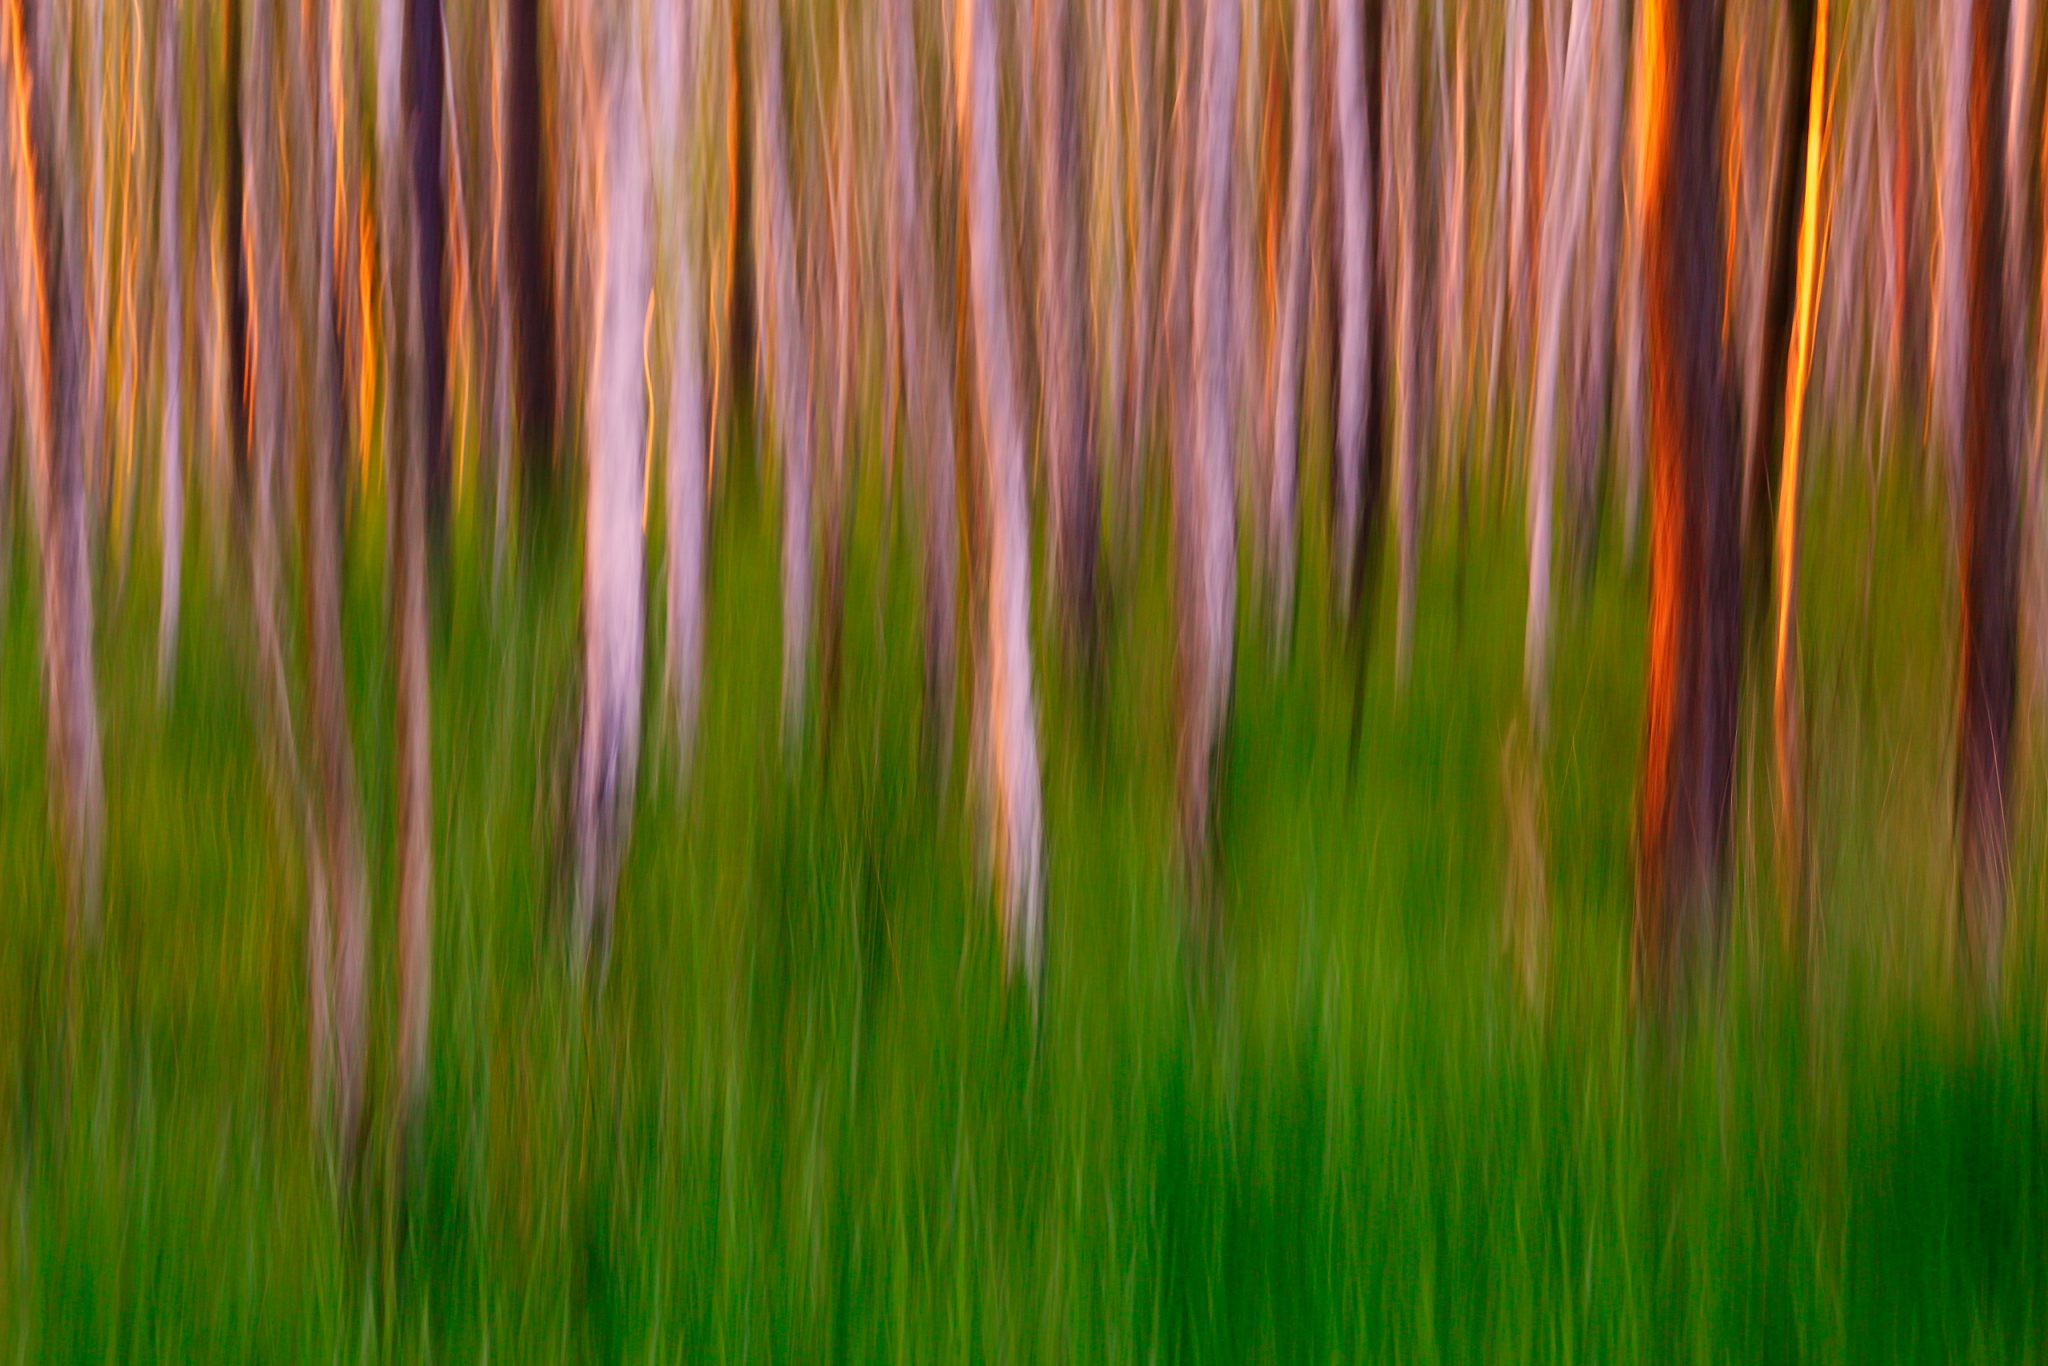 Pine forest in the evening glow depicted abstractly.